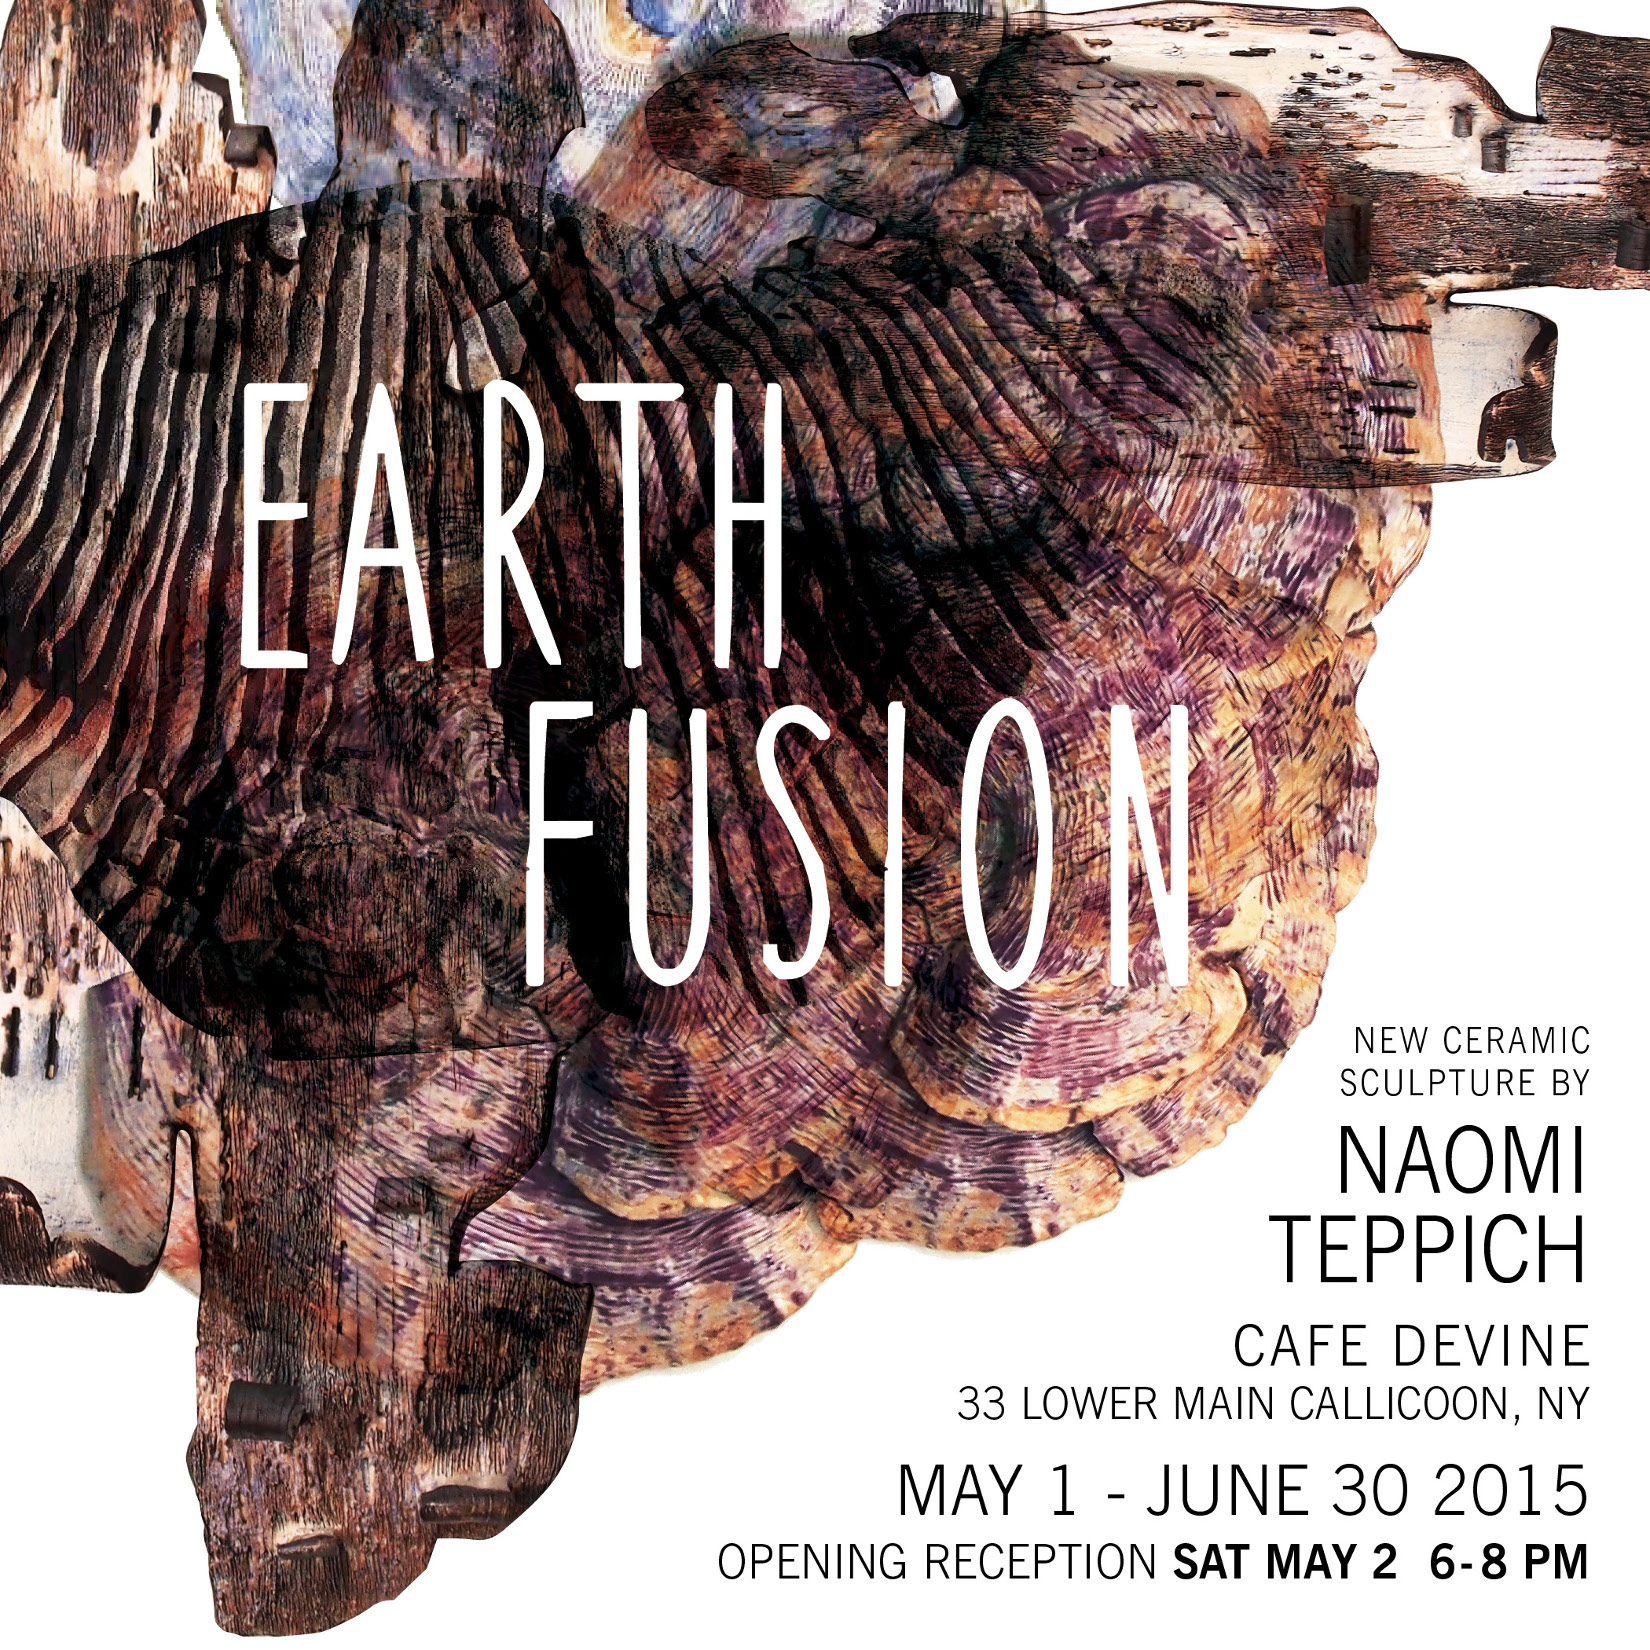 Earth Fusion solo exhibition at the Cafe Devine, Callicoon, NY